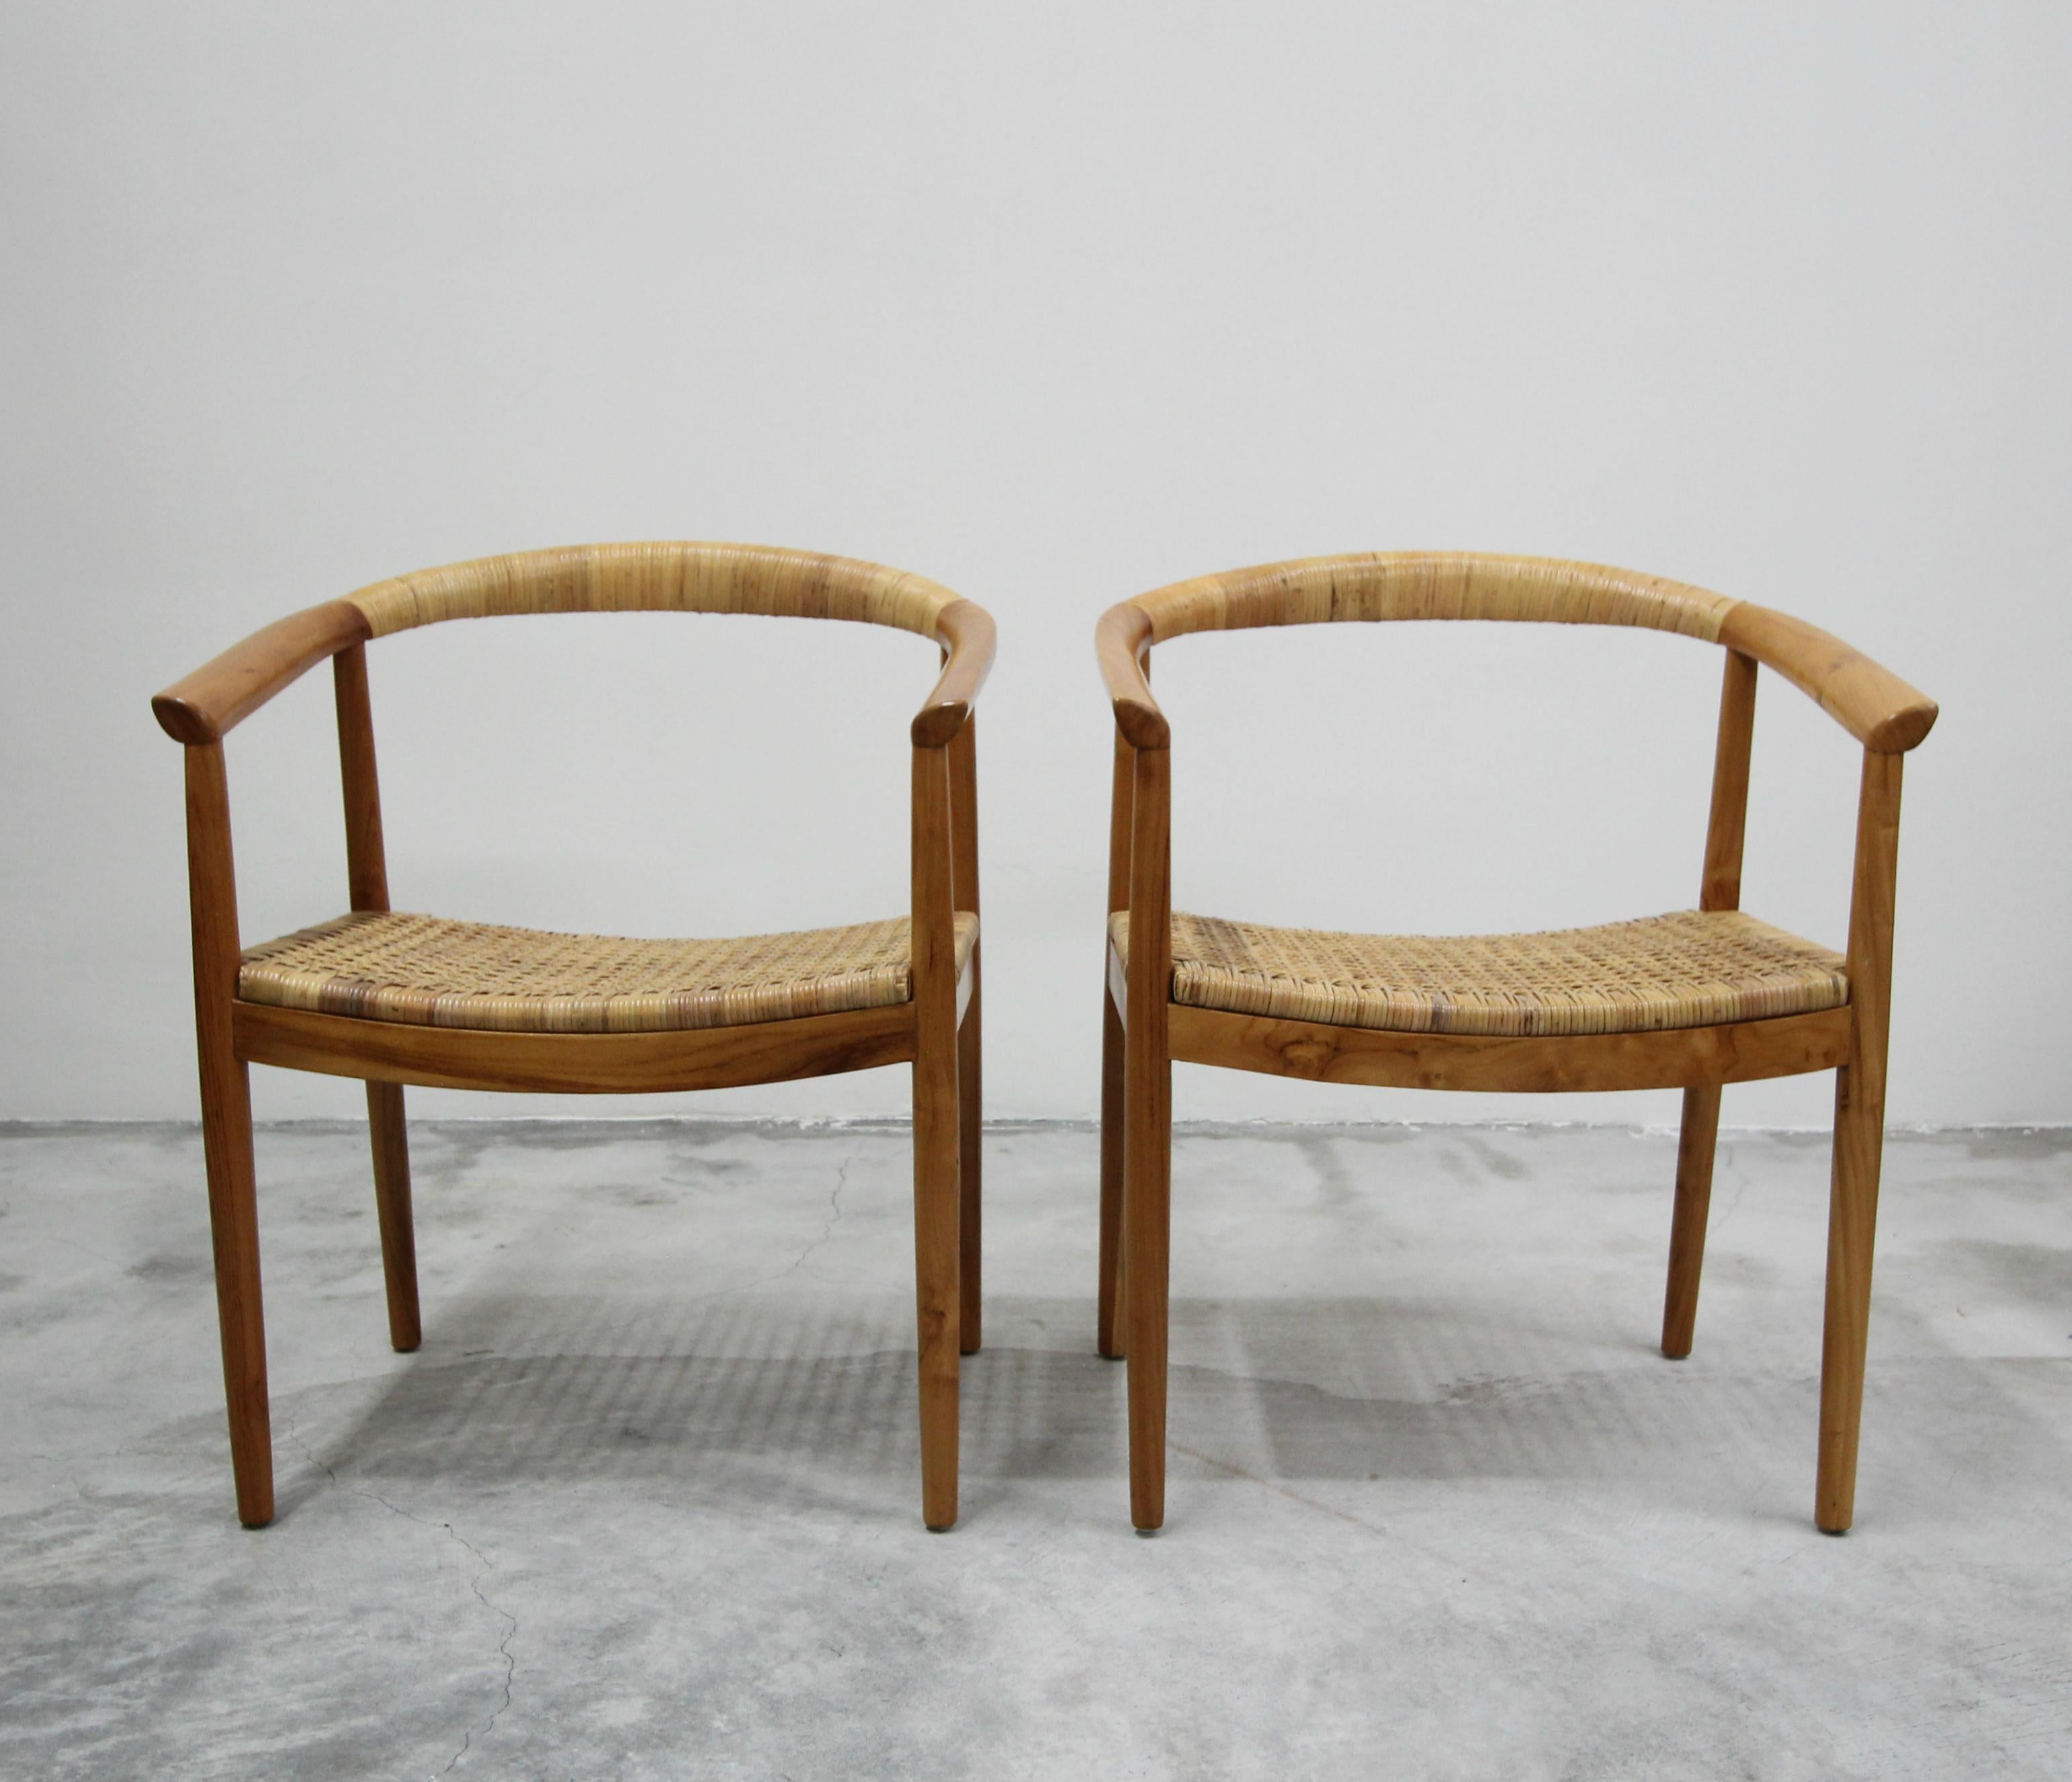 Absolutely fabulous pair of teak and cane side chairs. These chairs are large but so minimalistic. They would truly made the perfect pair of side chairs in any living space. So petite in construction they almost disappear, but nothing short of great